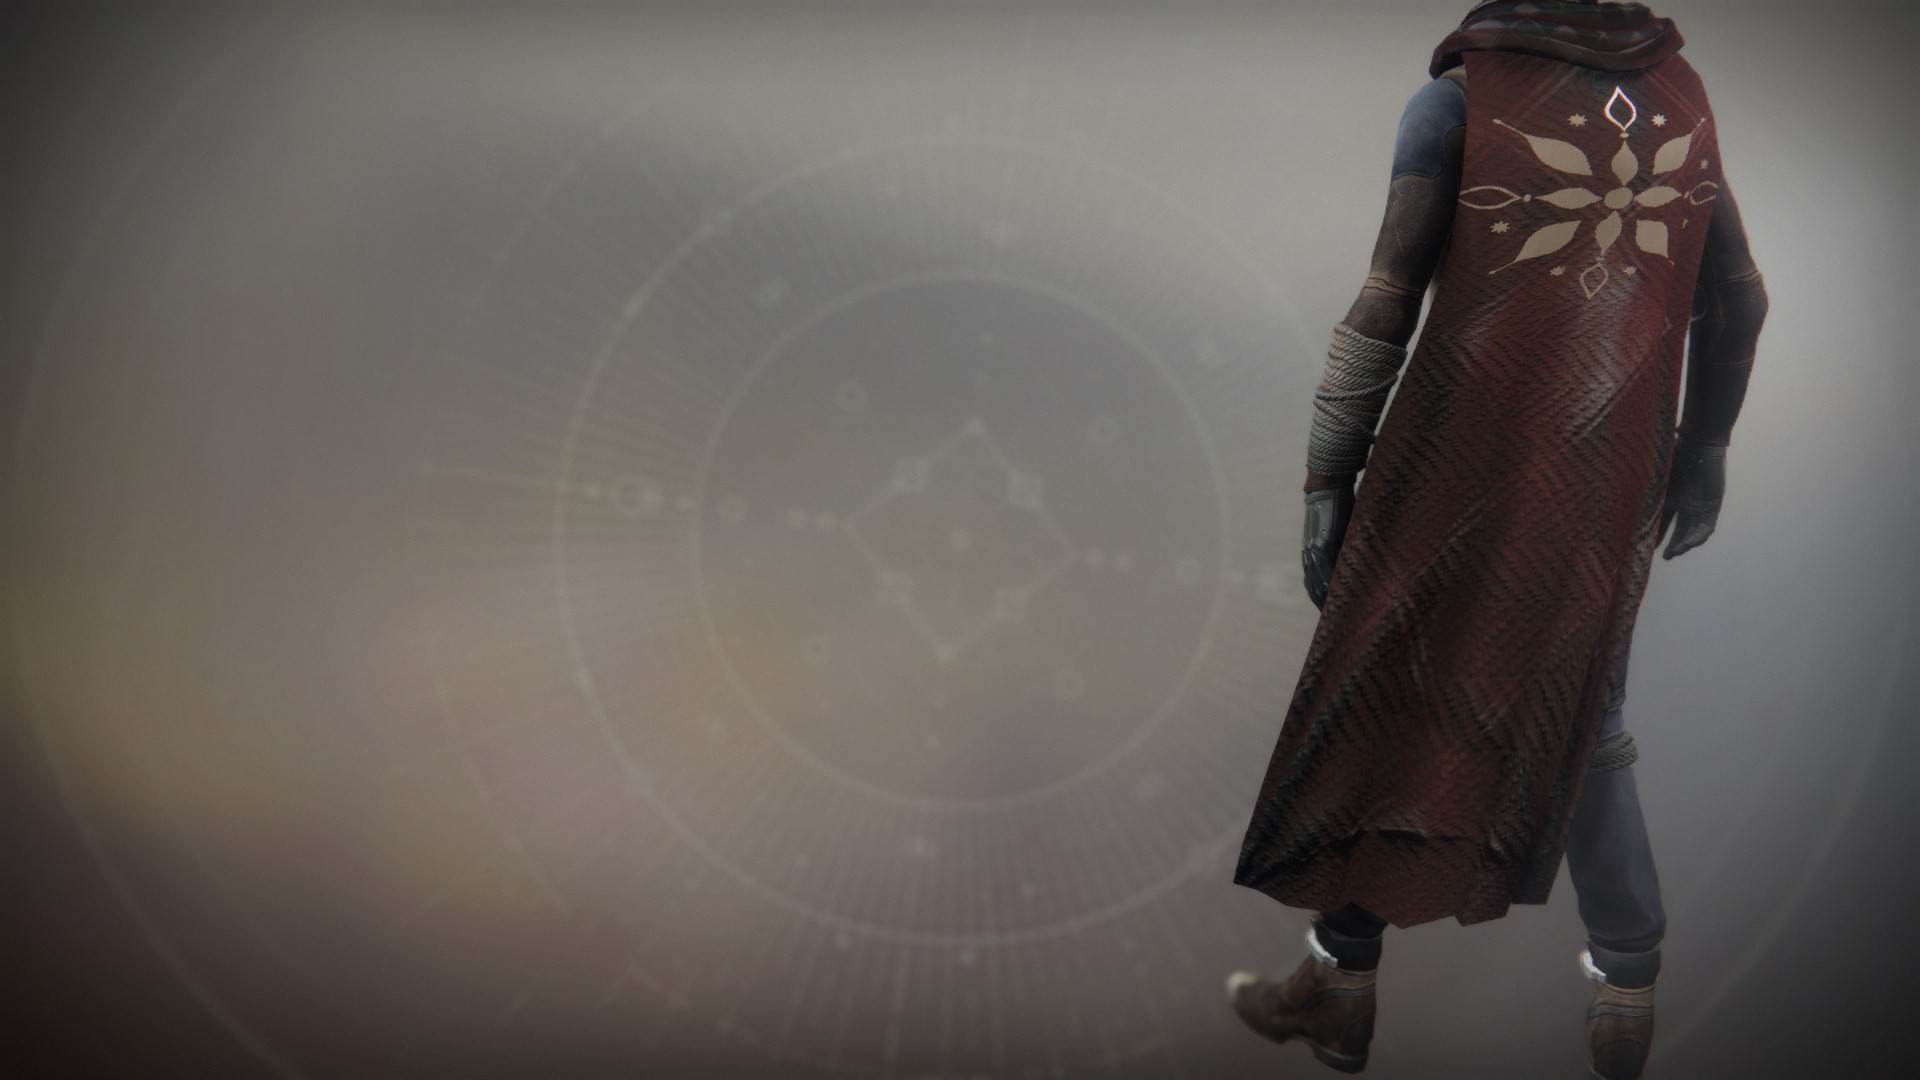 An in-game render of the Coronation Cloak.